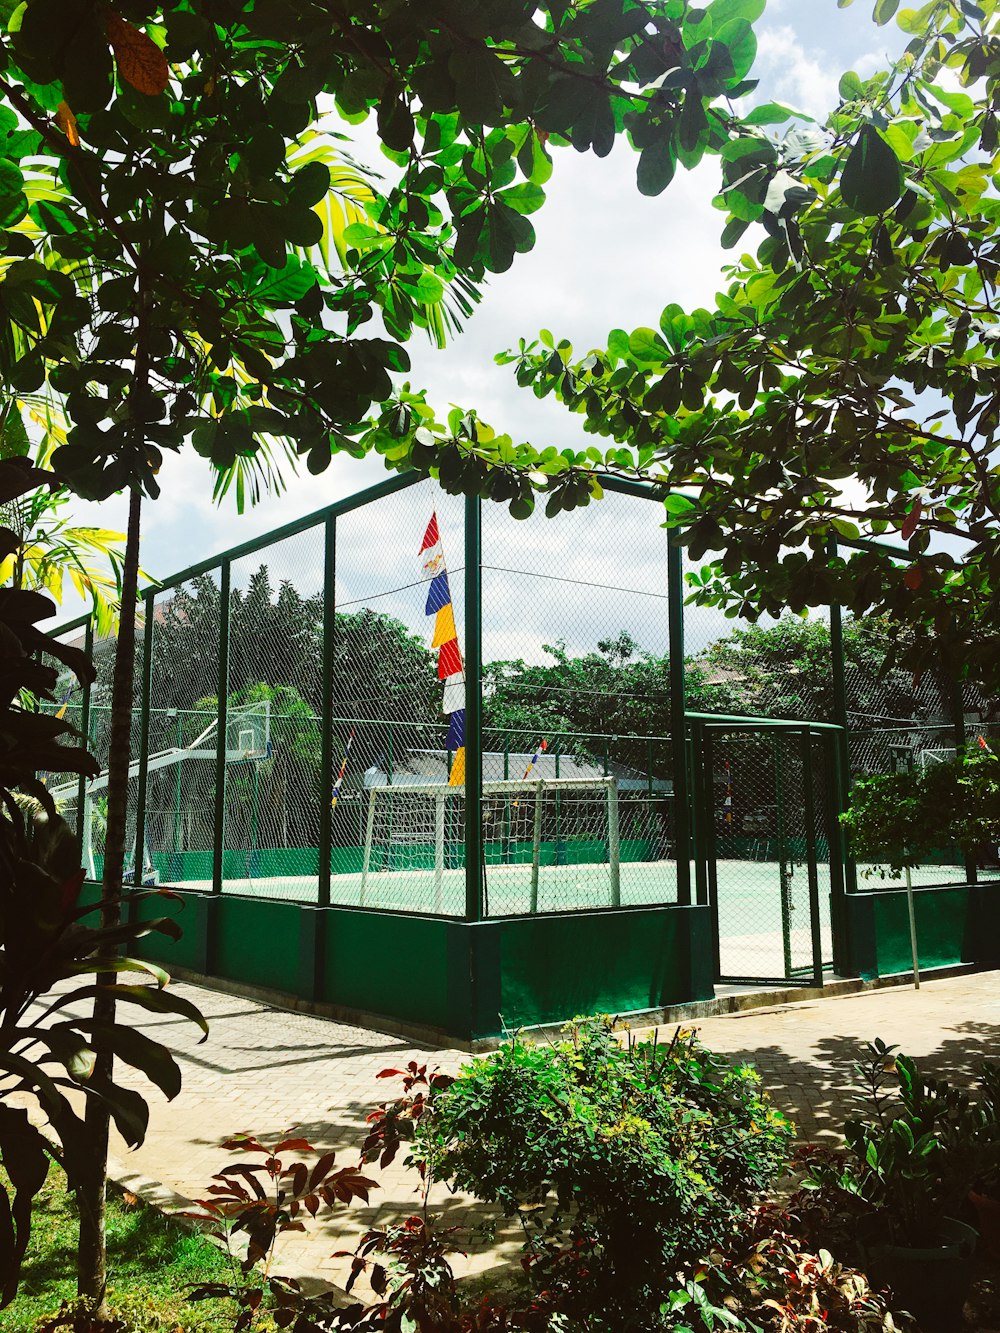 playing court near trees